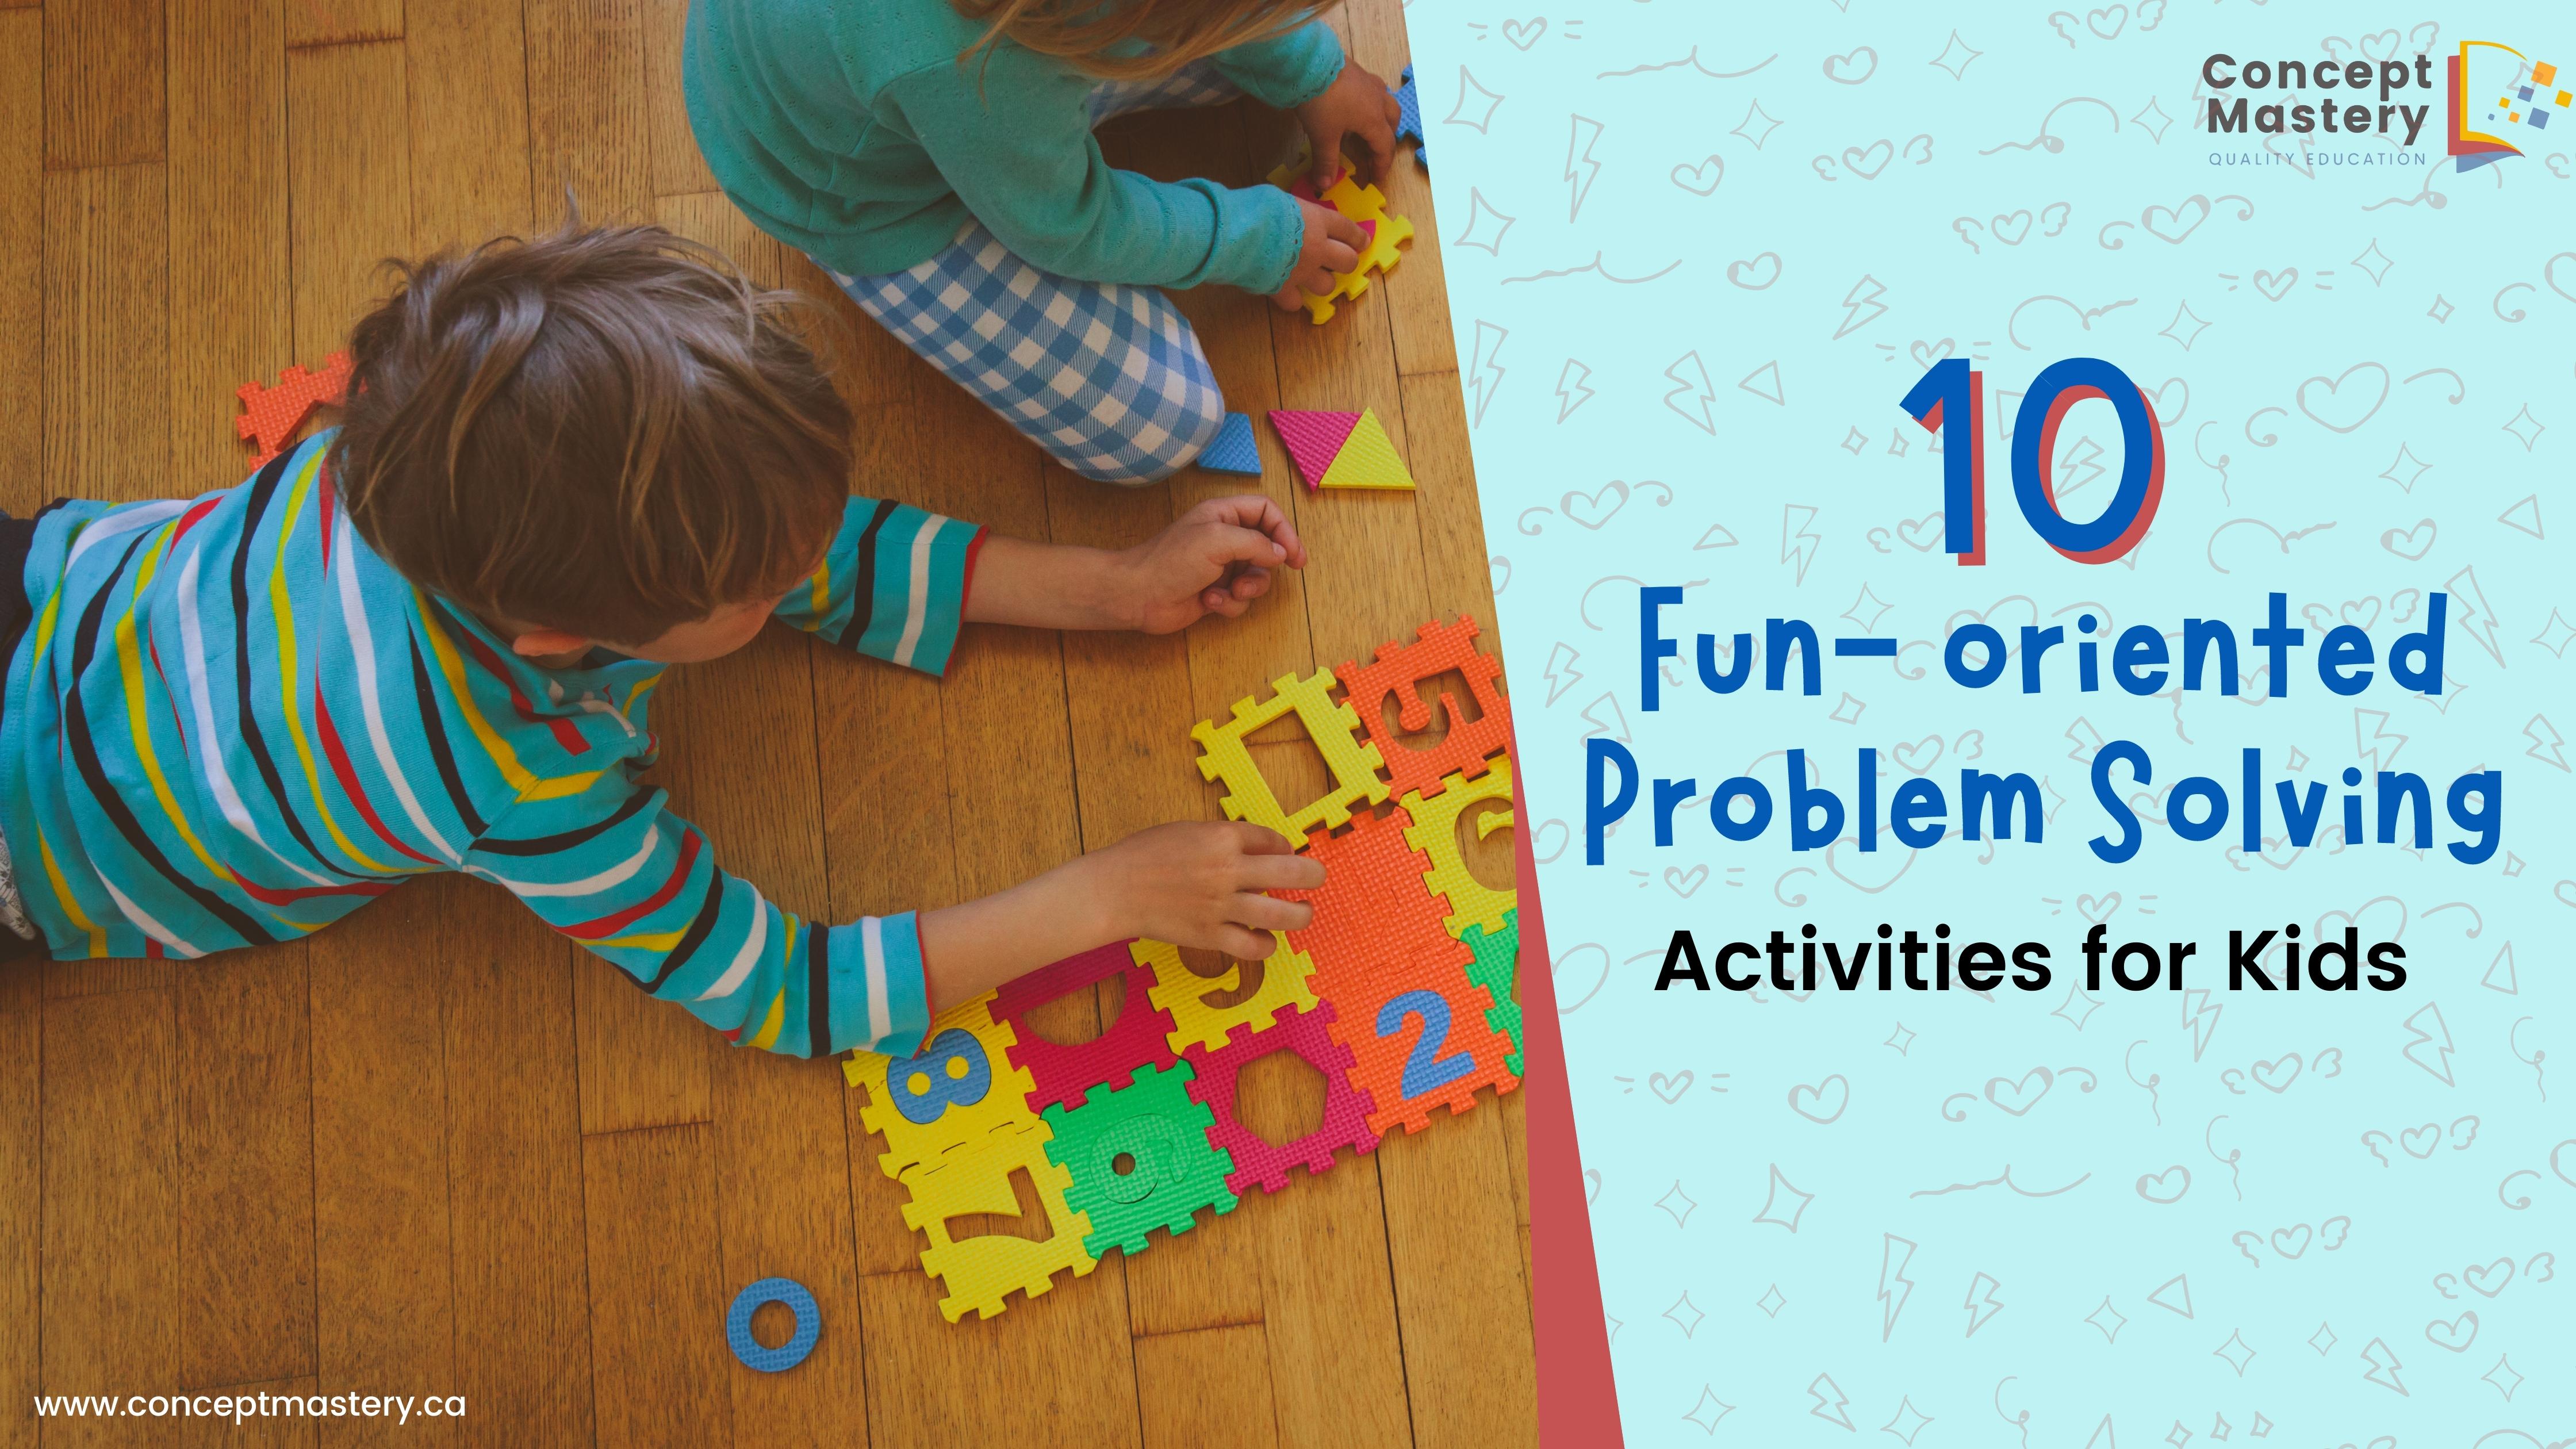 10-fun-oriented-problem-solving-activities-for-kids-concept-mastery